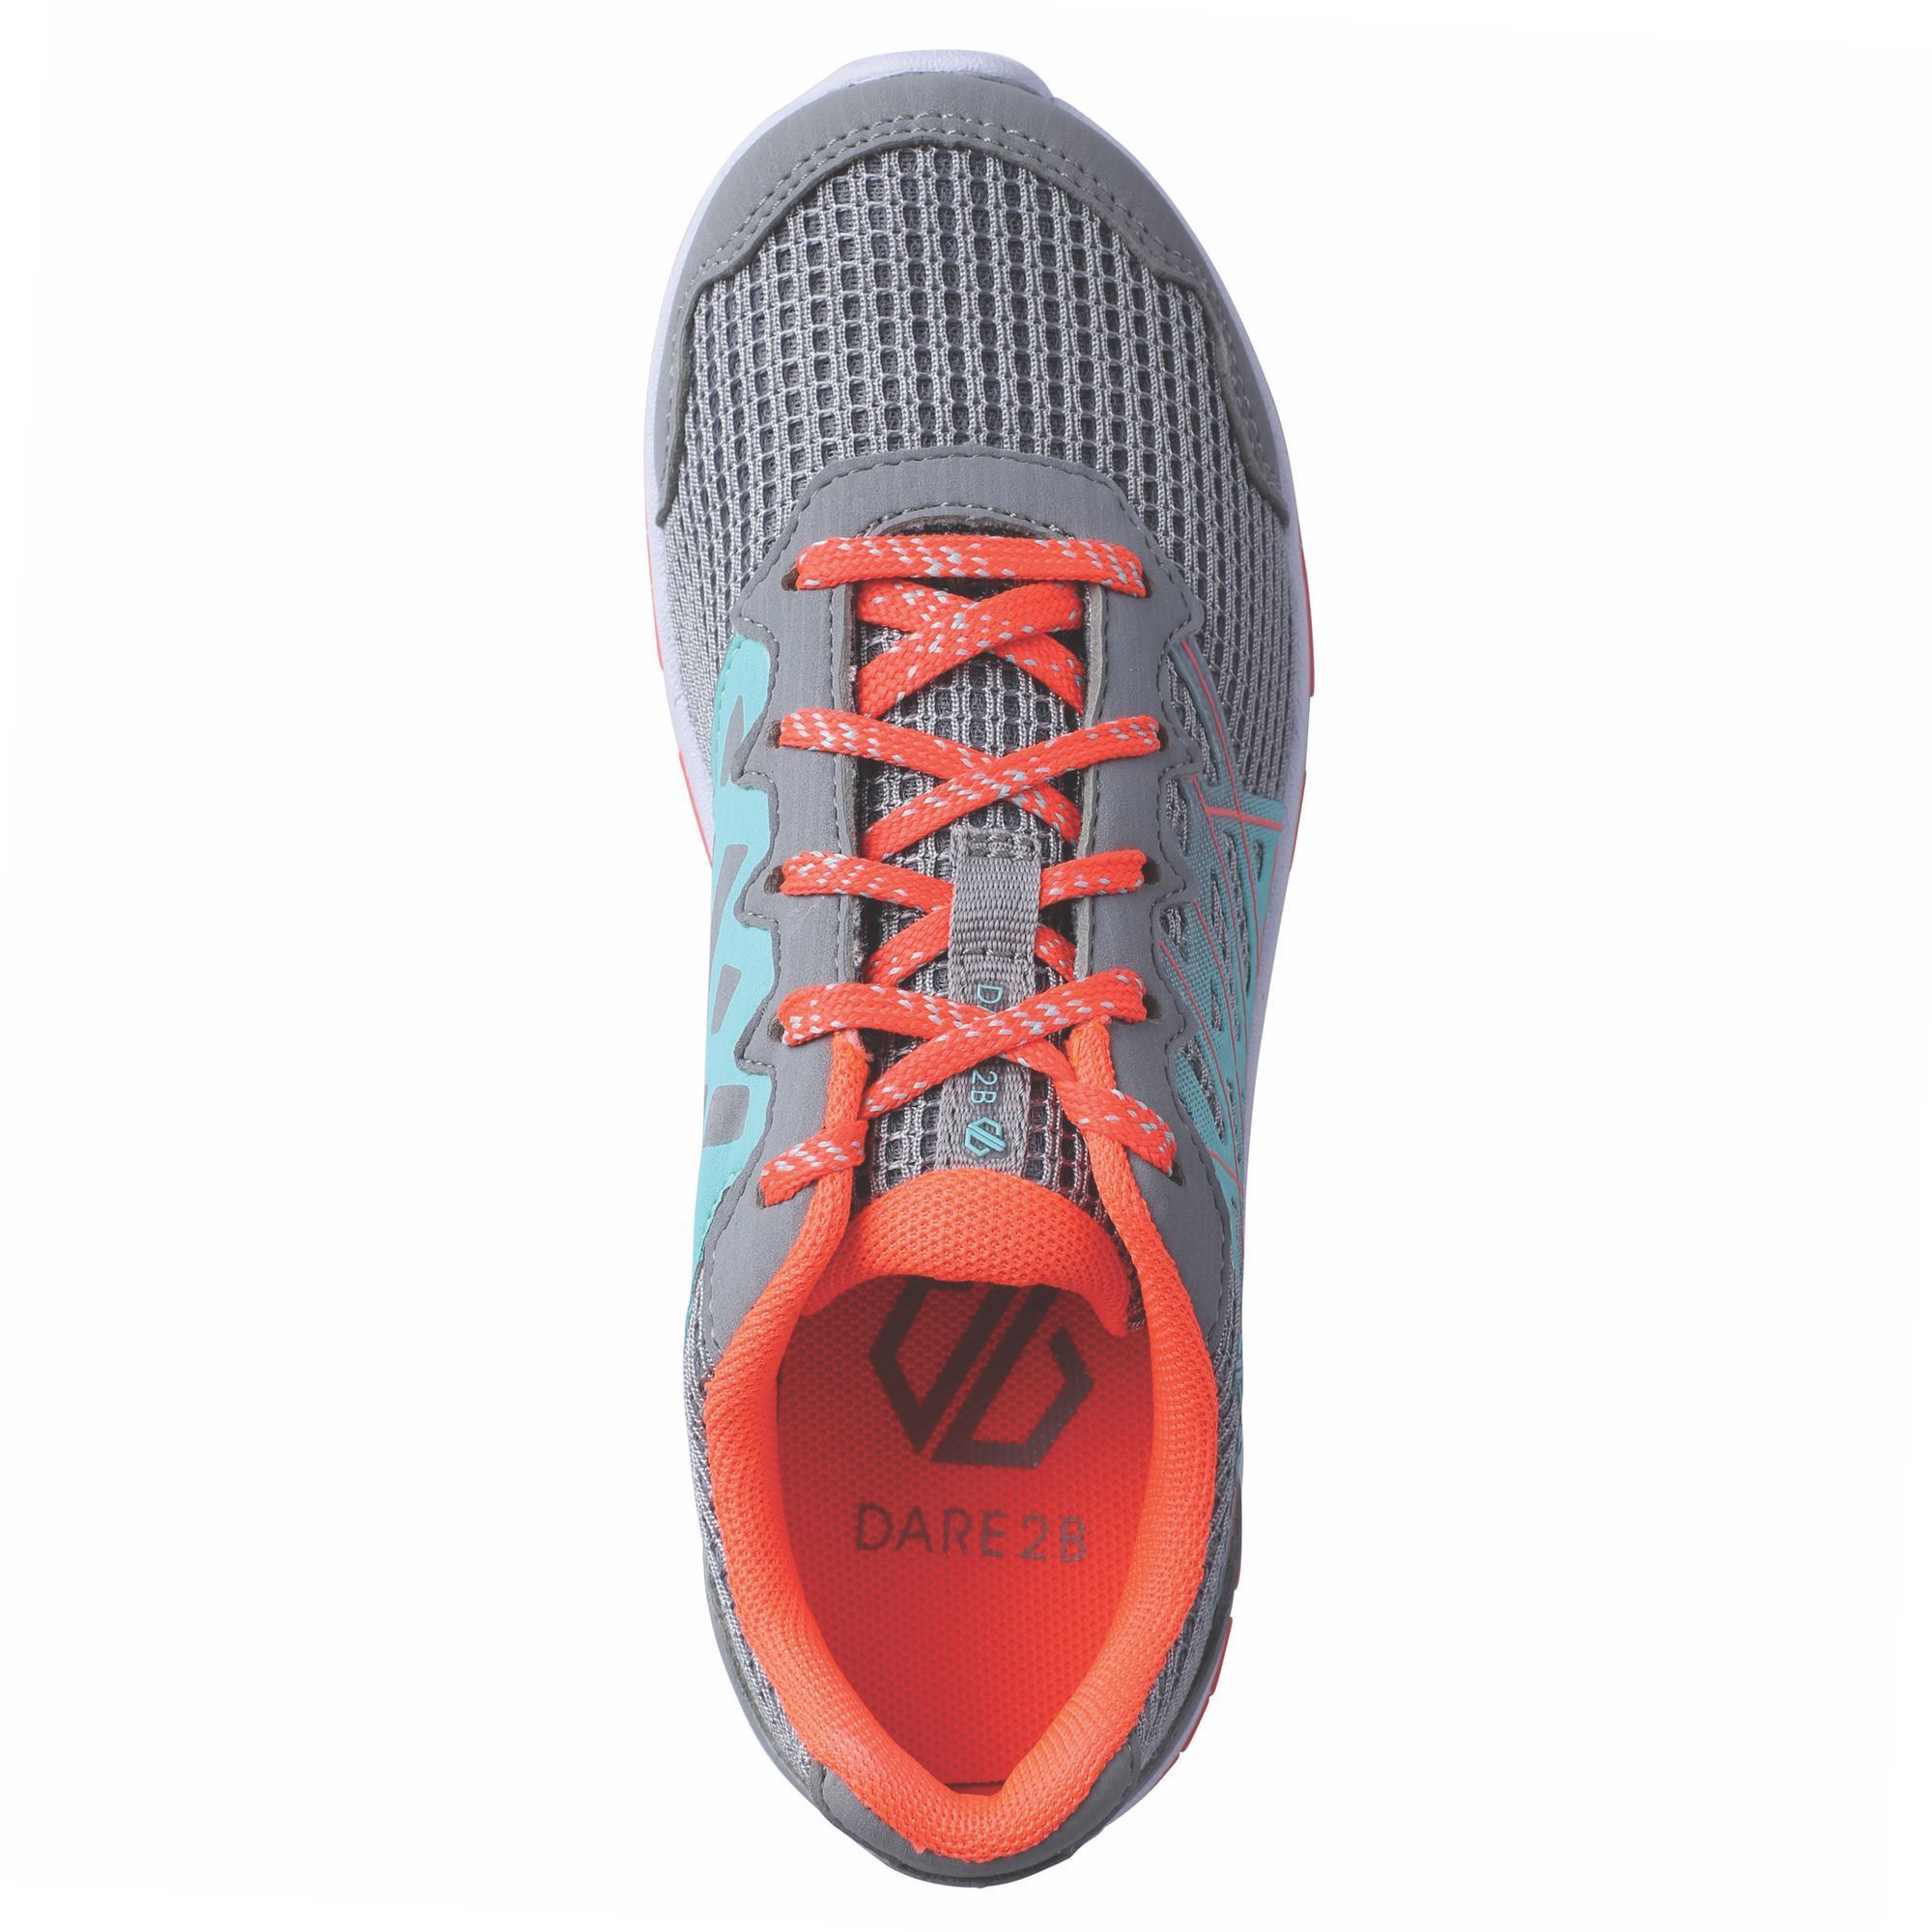 Thermo Plastic Polyurethane 10%, Polyurathane 40%, Polyester 50%. Lightweight mesh upper with PU overlays for a balance of breathability and support. EVA comfort footbed. EVA midsole with TPR pods for a balance of traction and underfoot comfort.